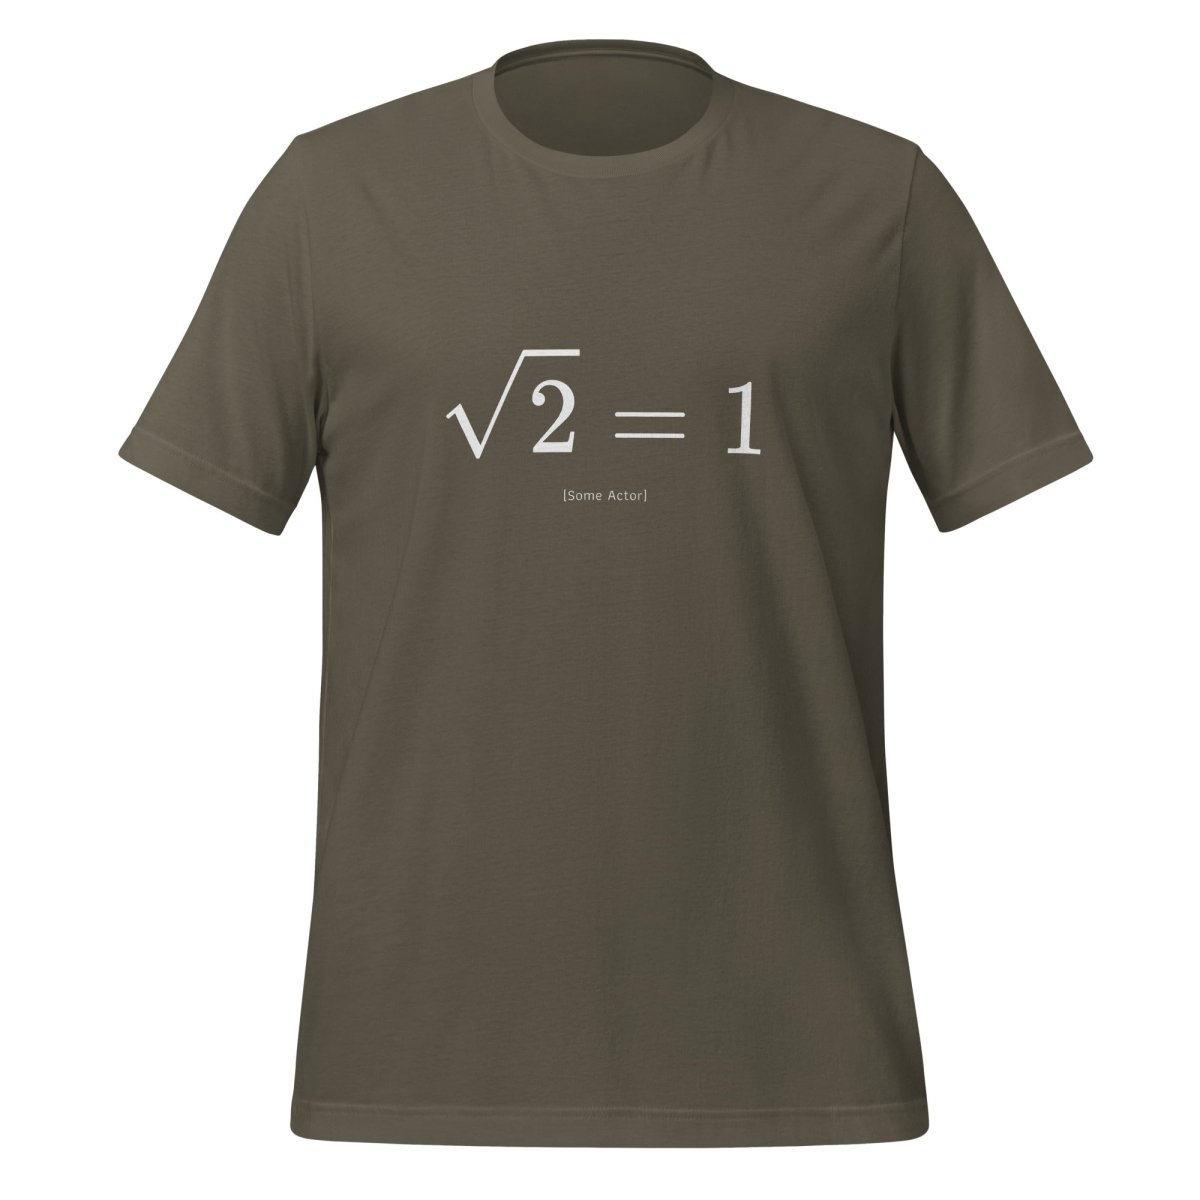 The Square Root of 2 Equals 1 T - Shirt (unisex) - Army - AI Store